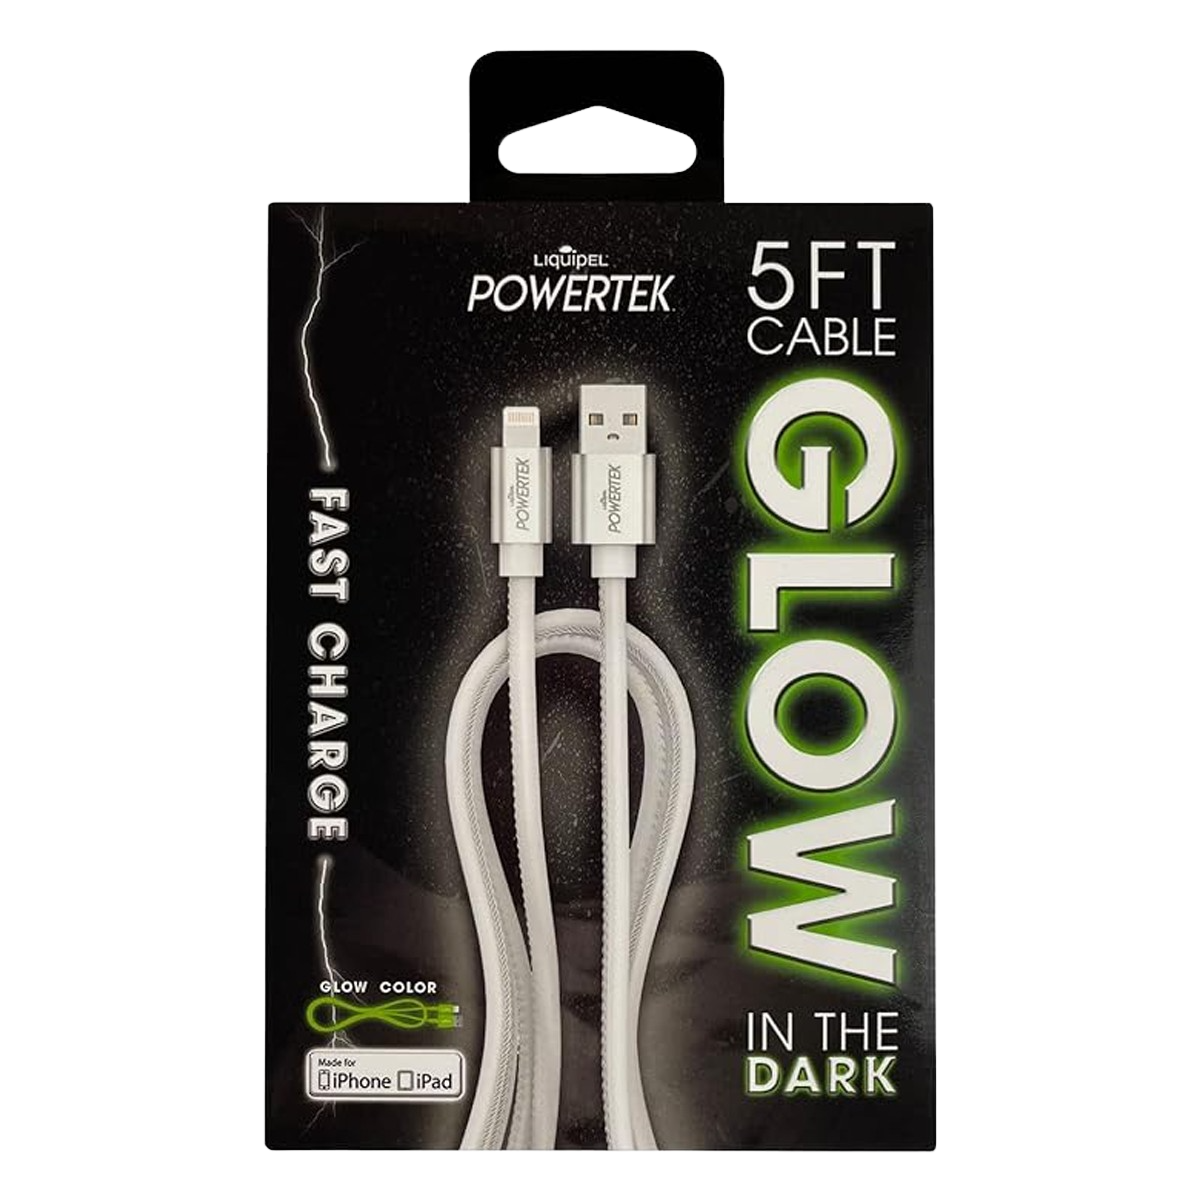 Glow in the Dark Cable (5 ft)